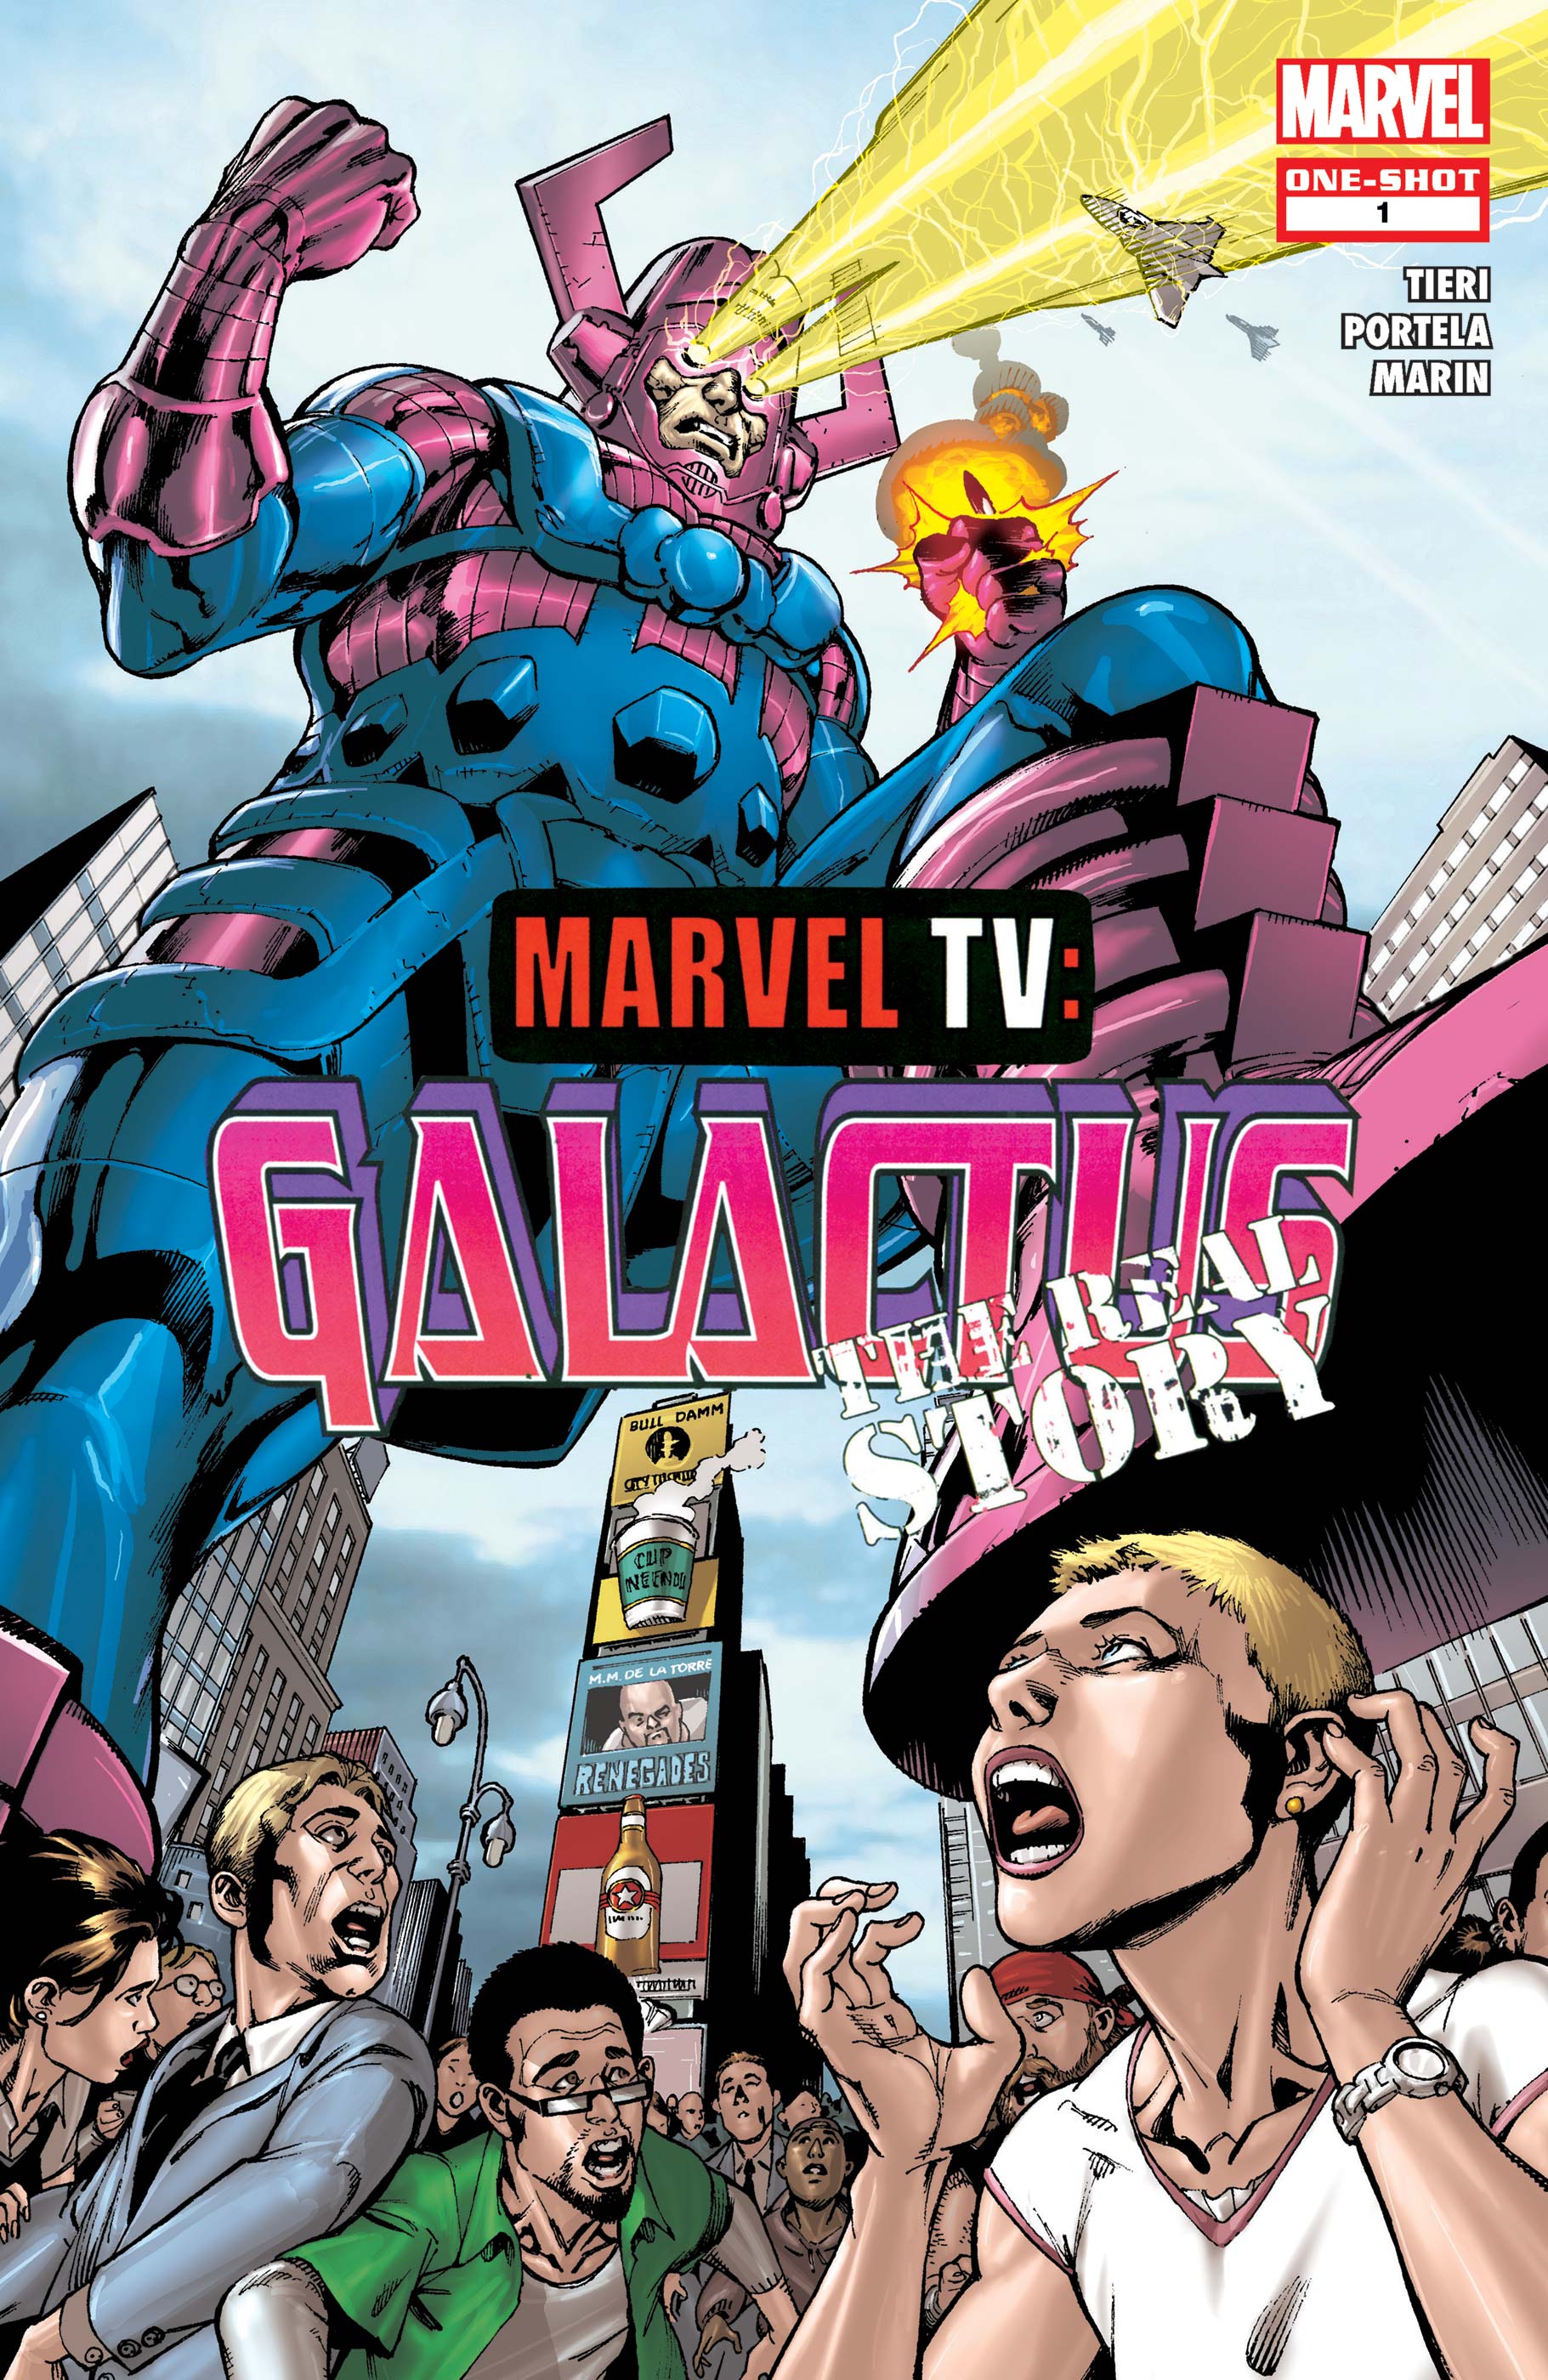 Marvel TV: Galactus - The Real Story (2009) #1